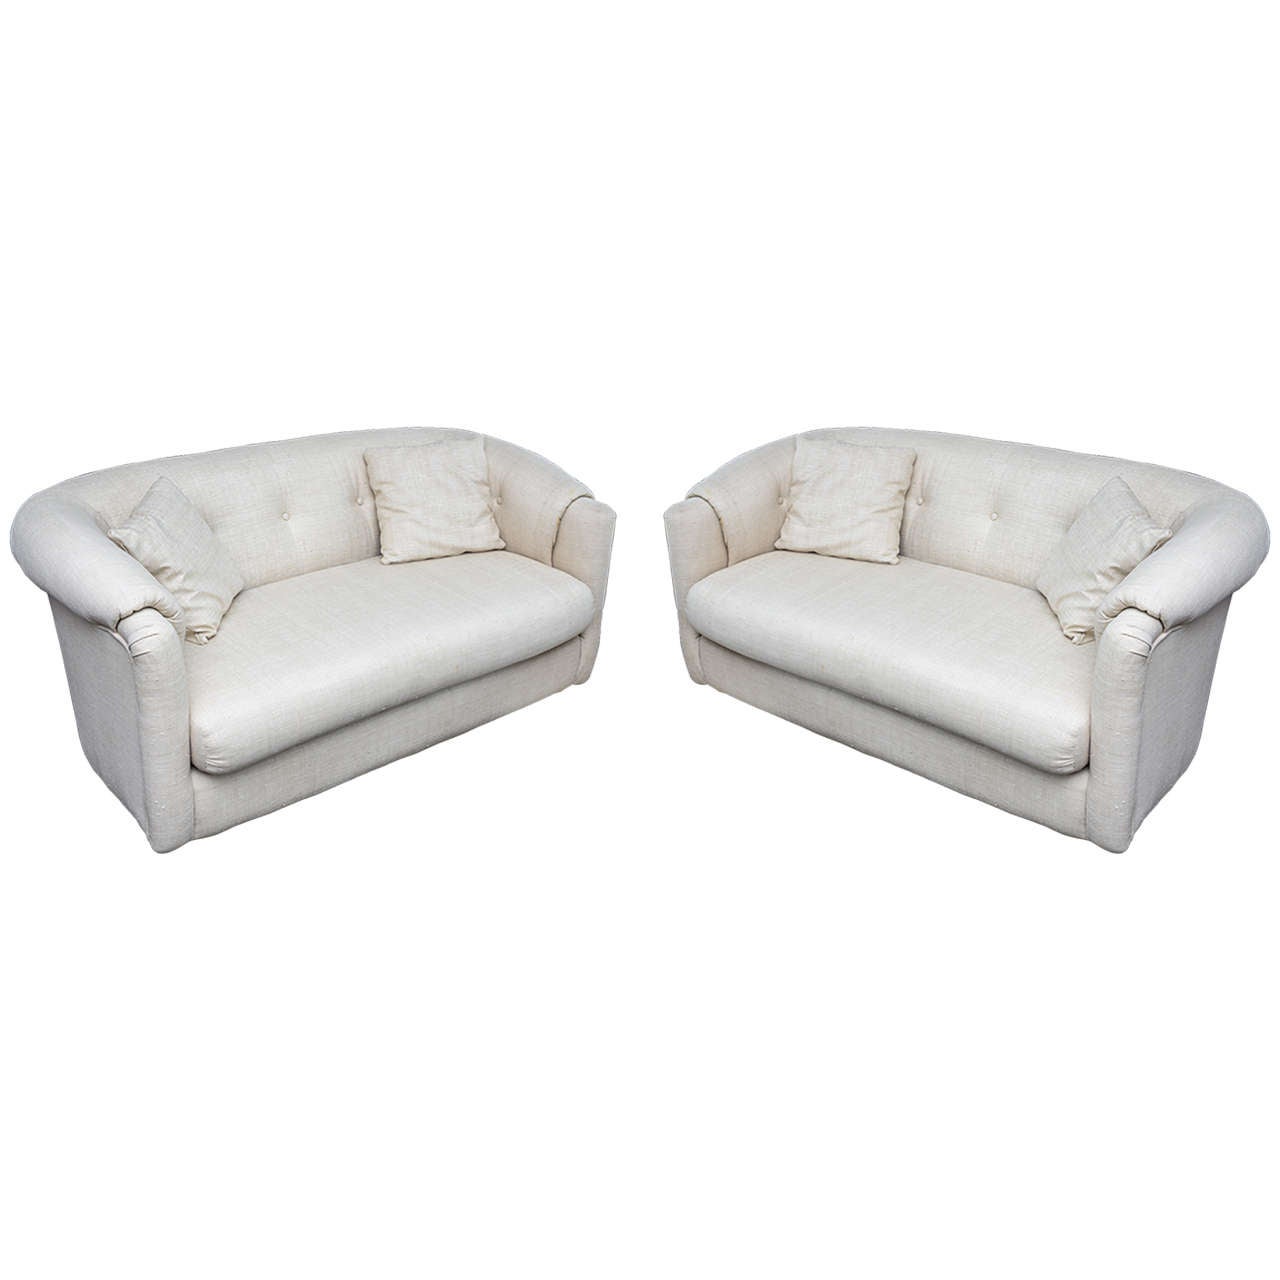 Pair of Raw Silk with Chrome Base Loveseats, USA, 1970s For Sale